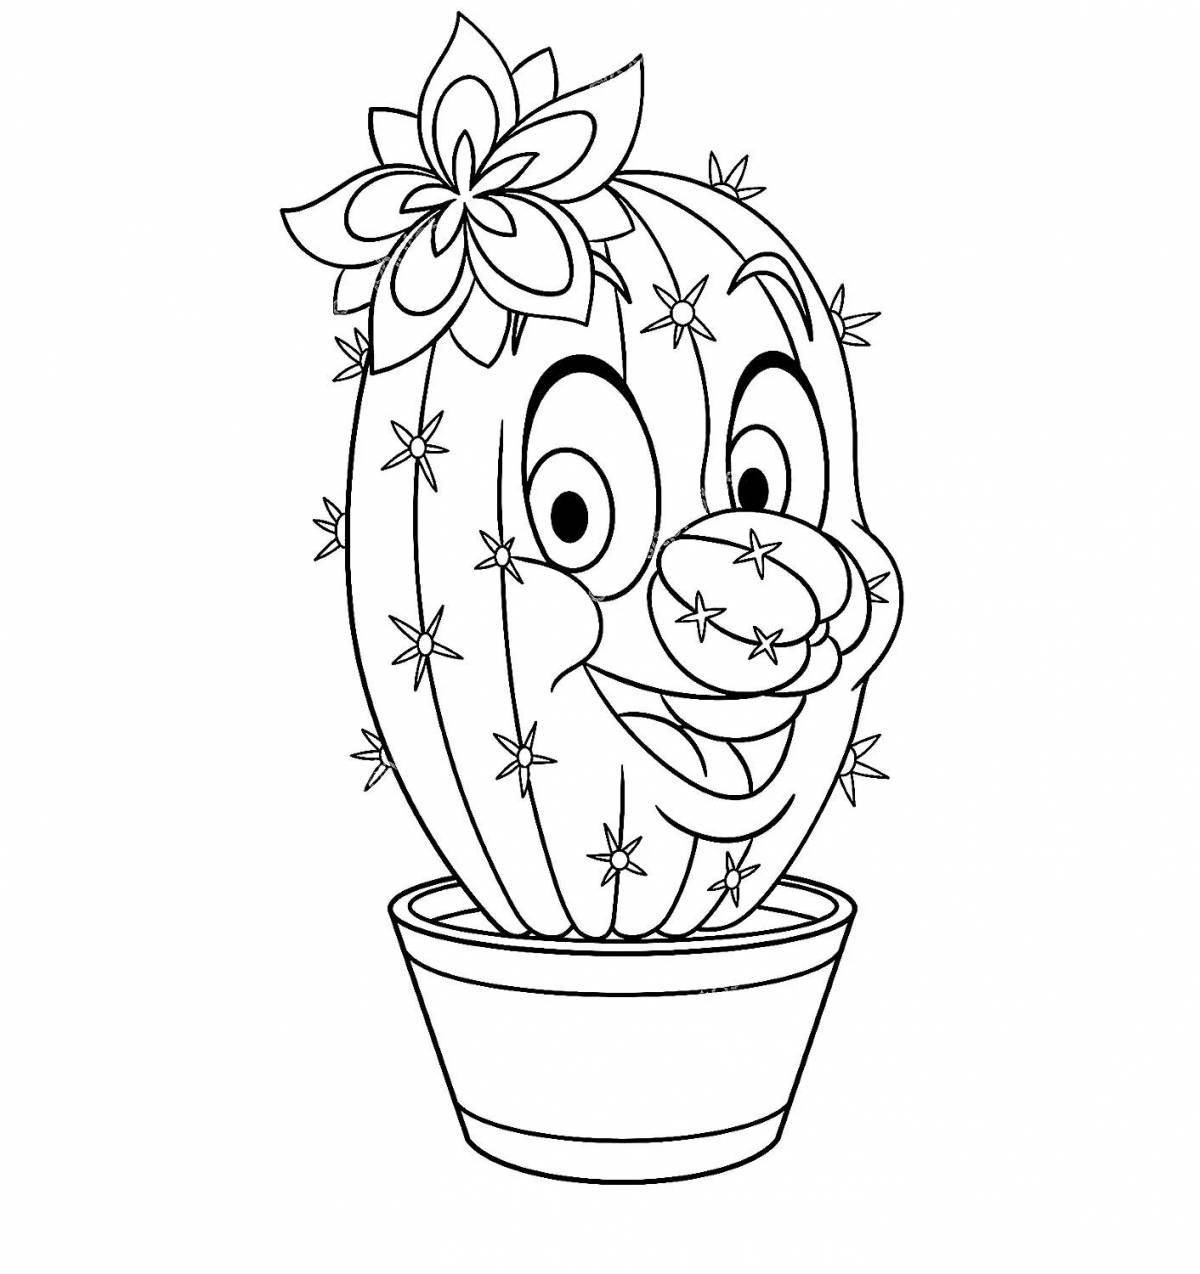 Living cactus in a pot for children